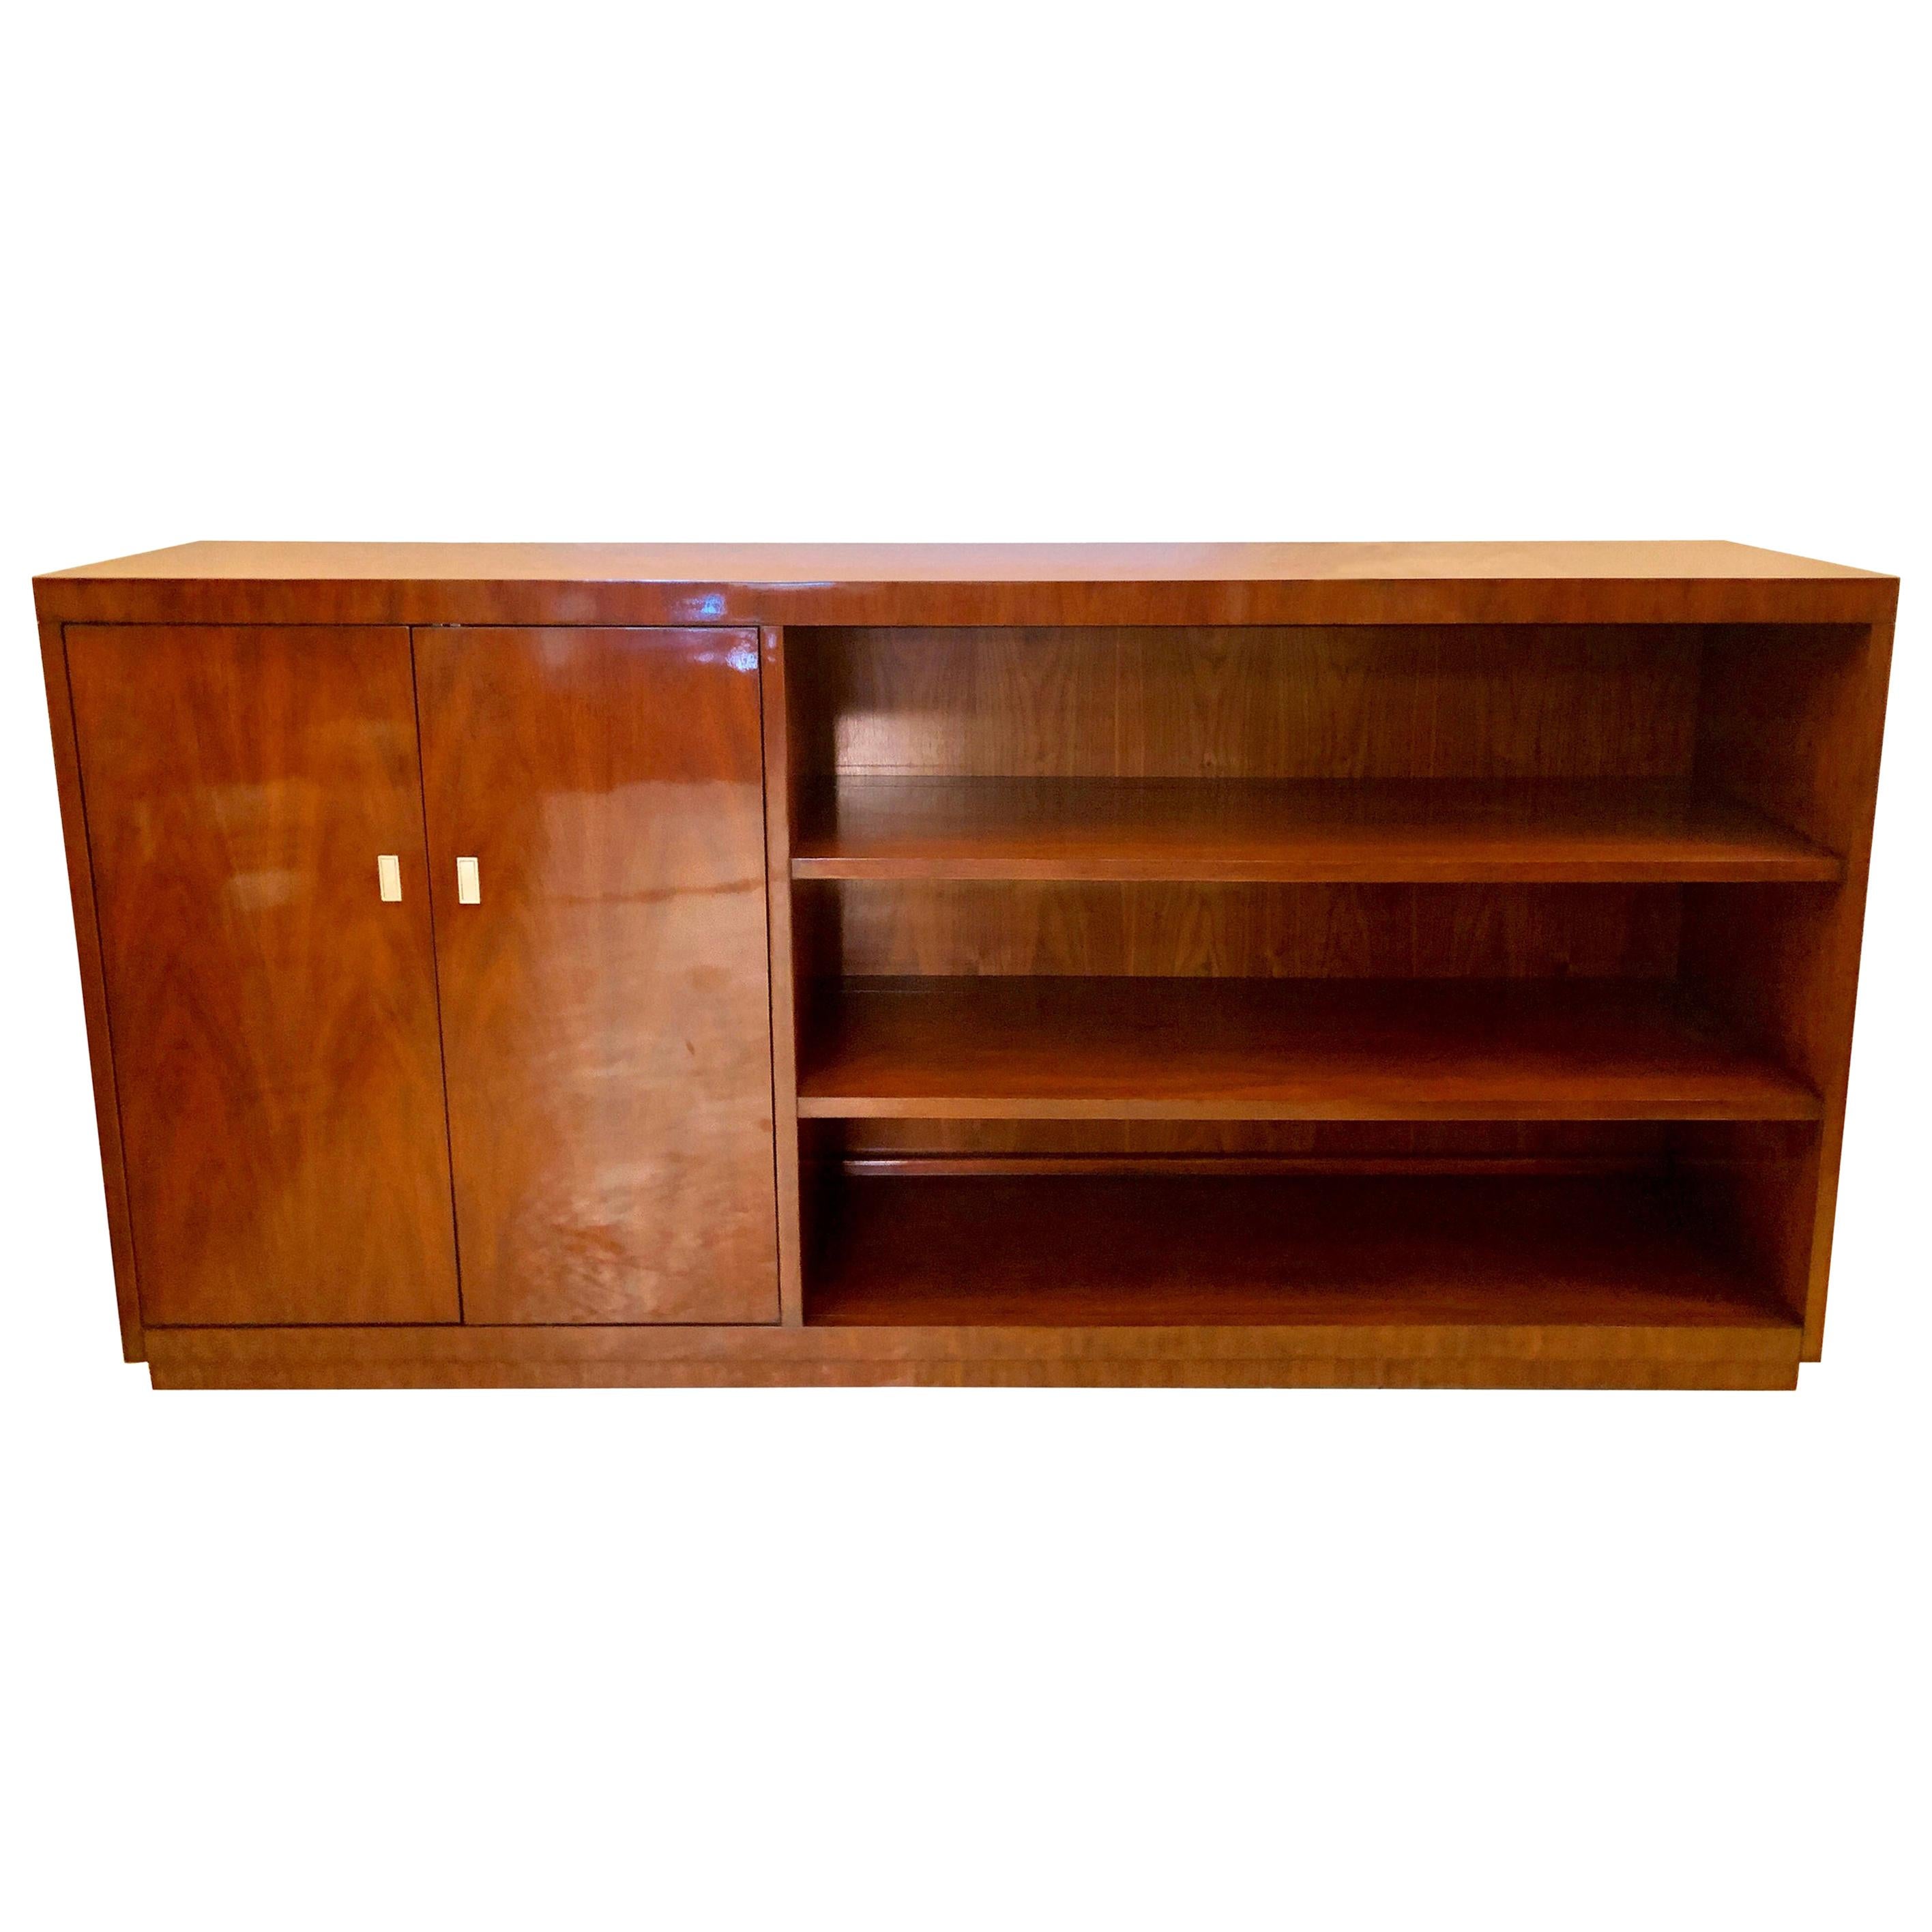 Ralph Lauren Hollywood Collection Sideboard, Credenza, Buffet Cabinet Labeled